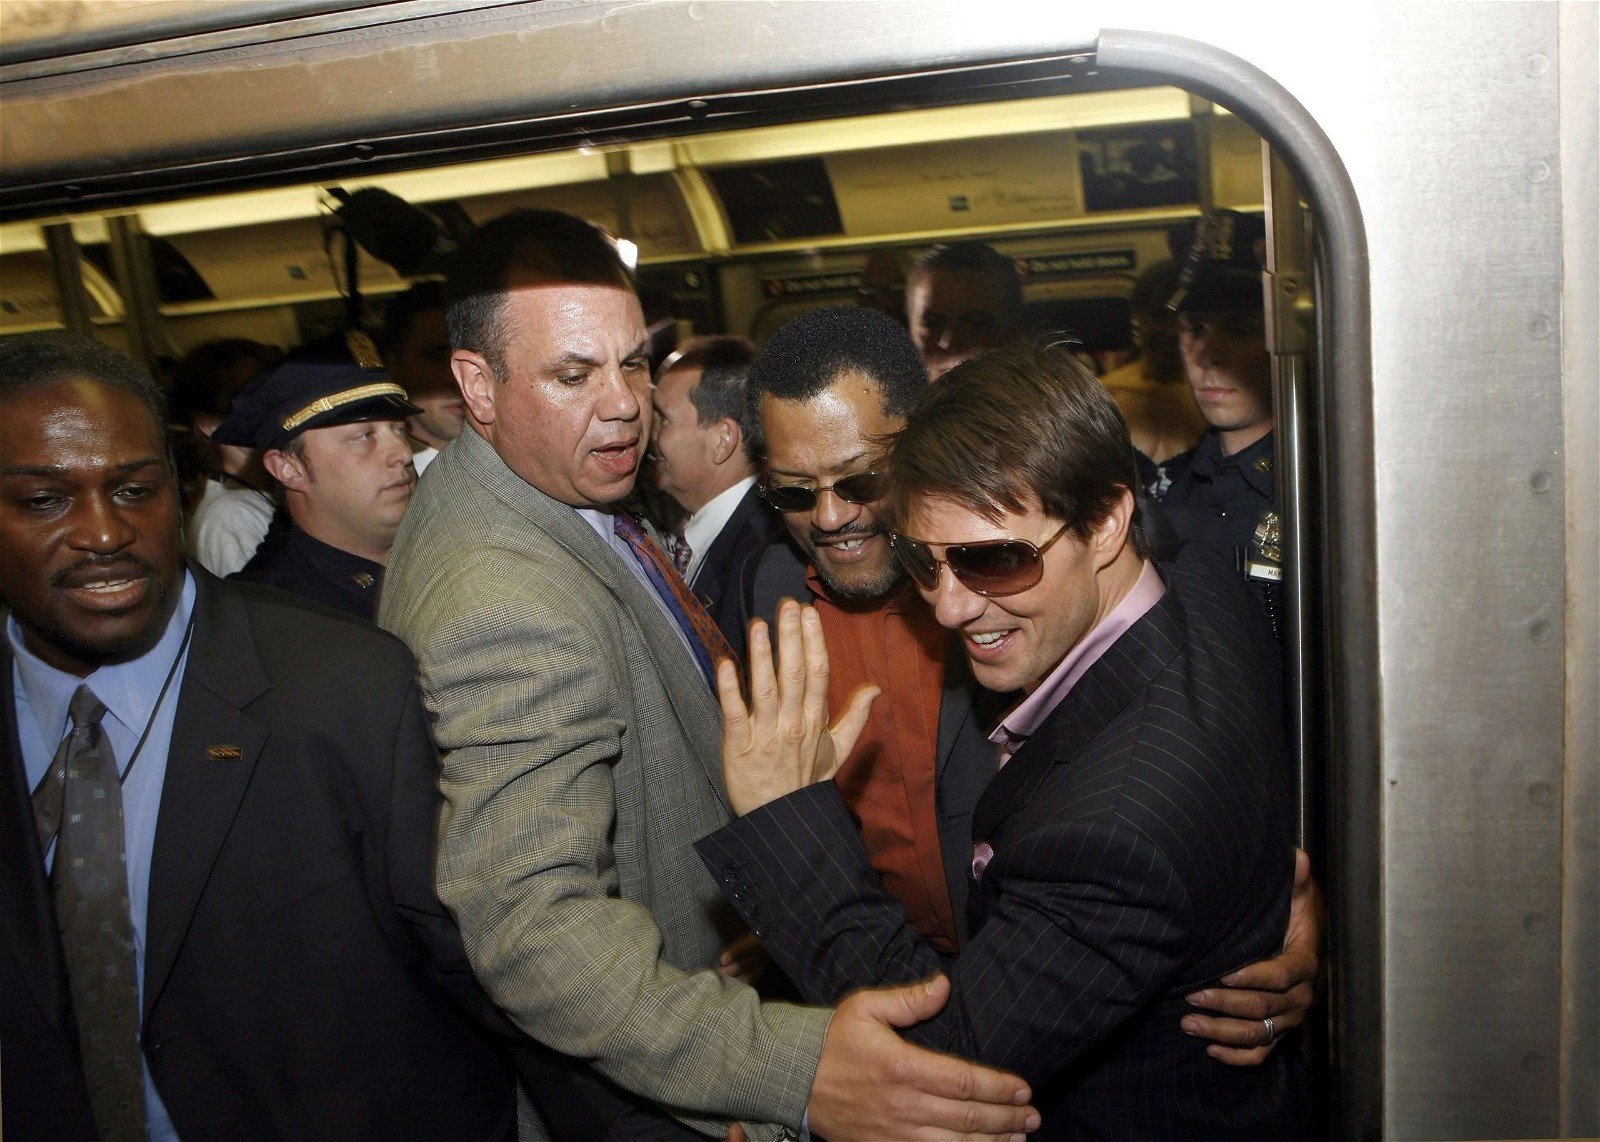 Tom Cruise in a subway